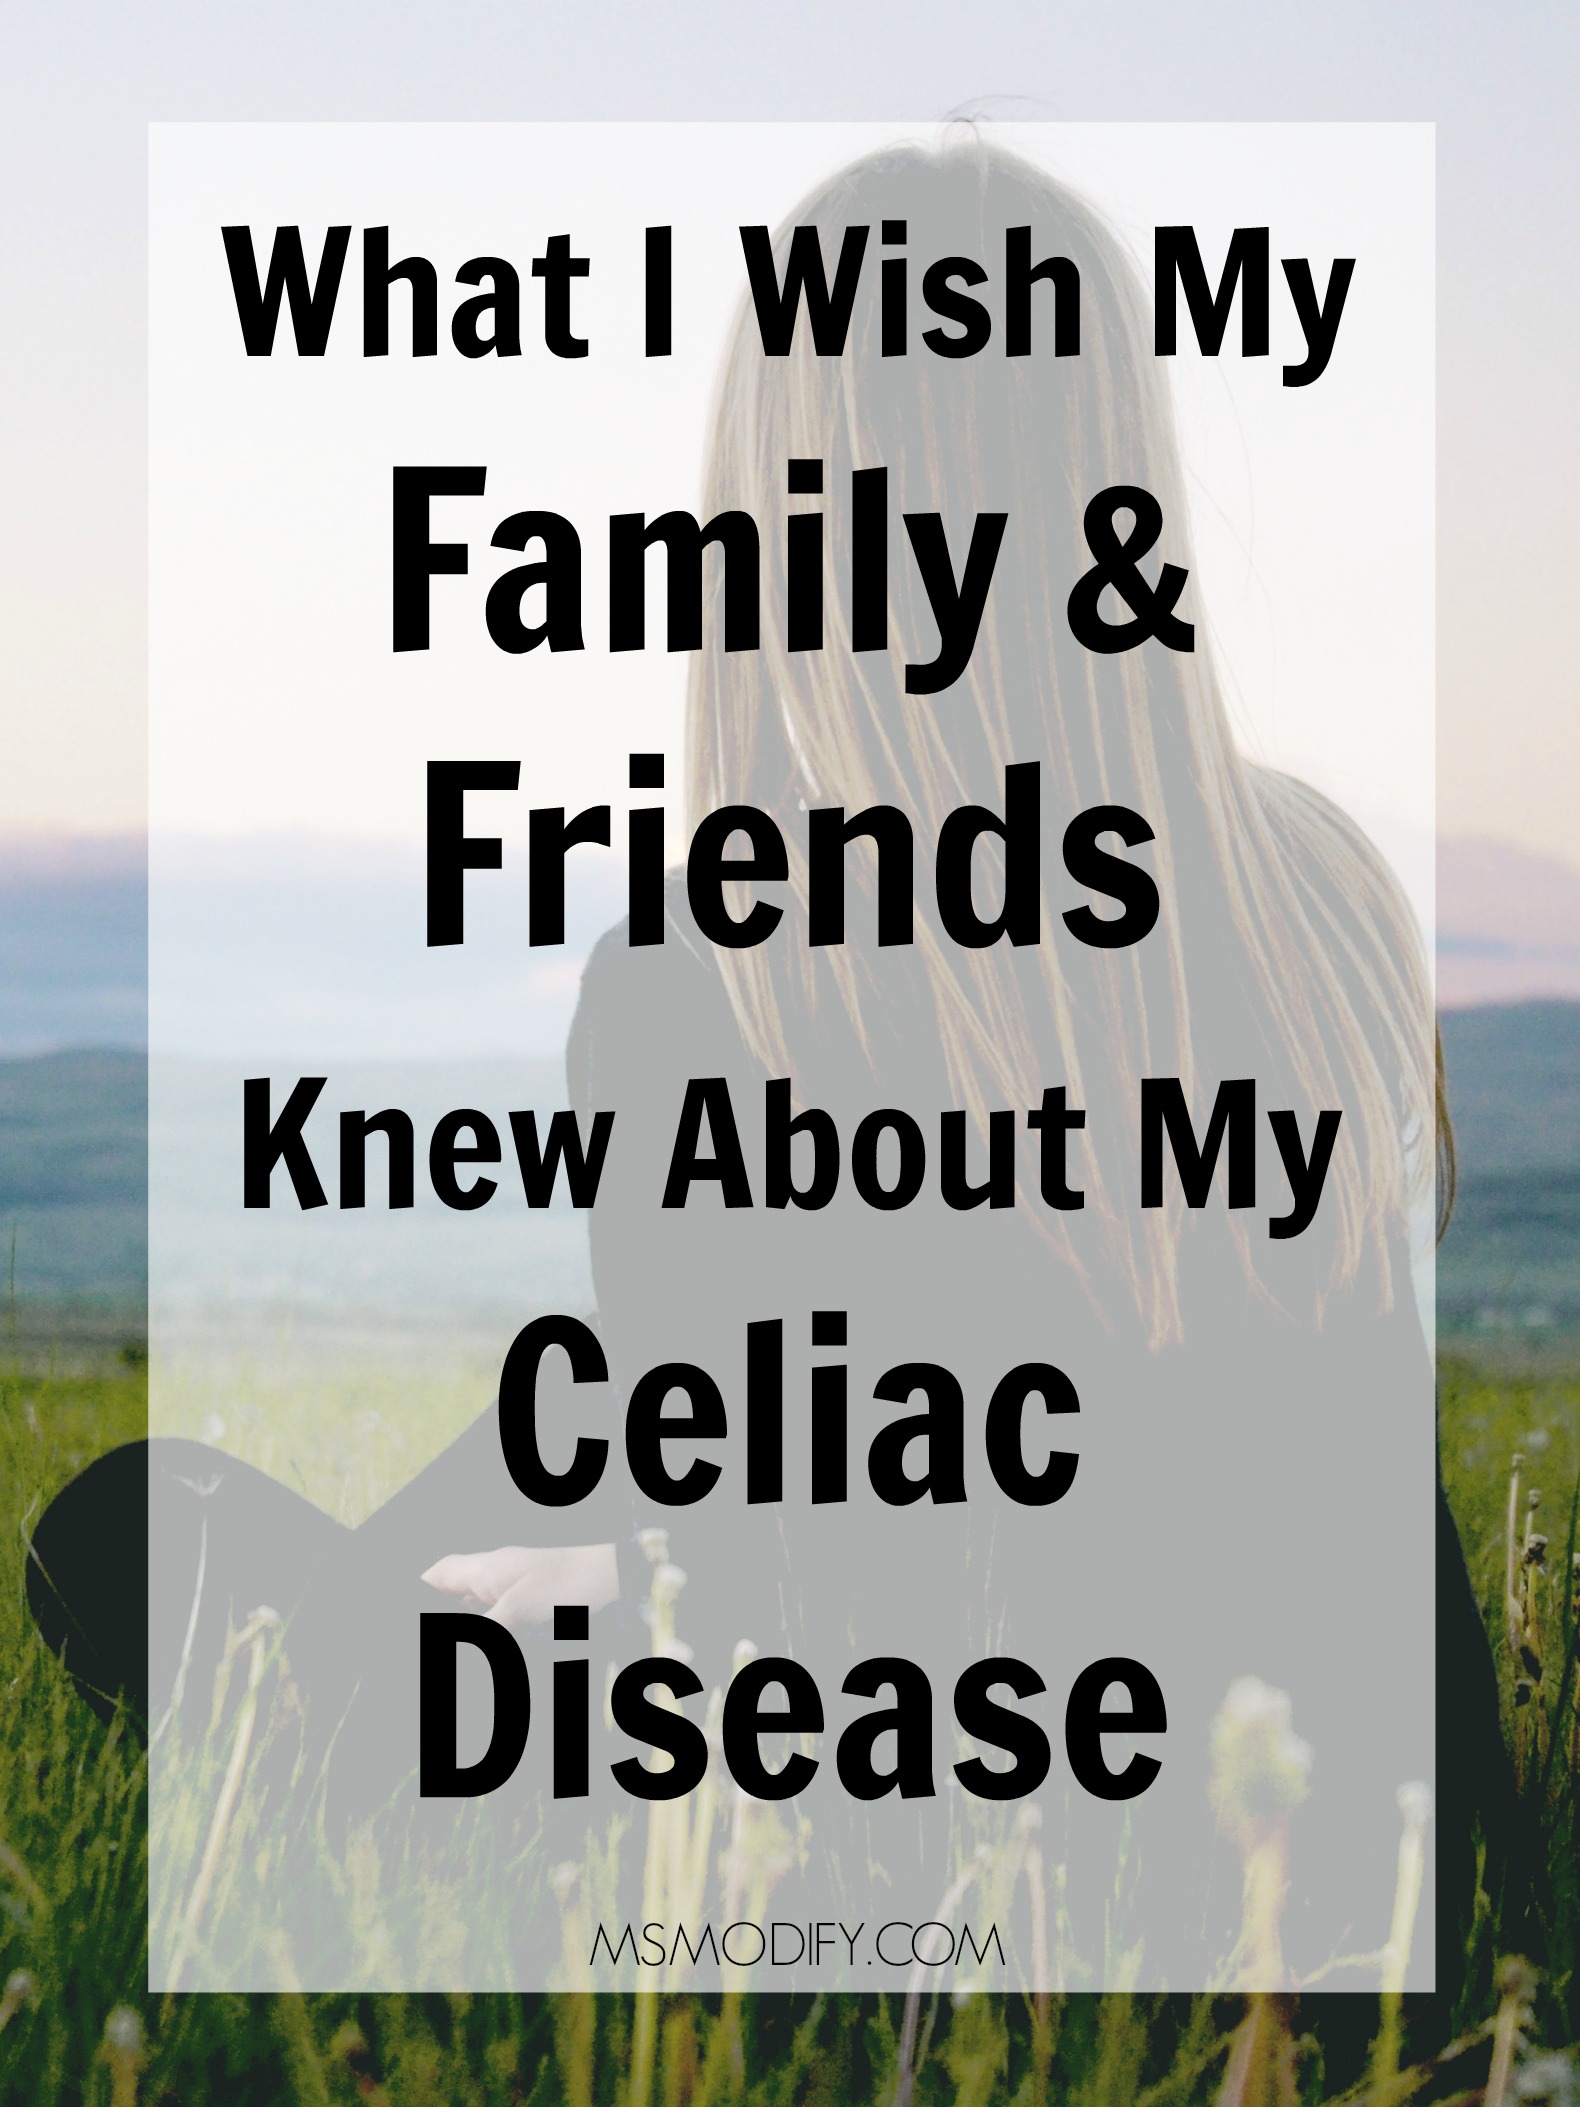 What I Wish My Family and Friends Knew About My Celiac Disease.